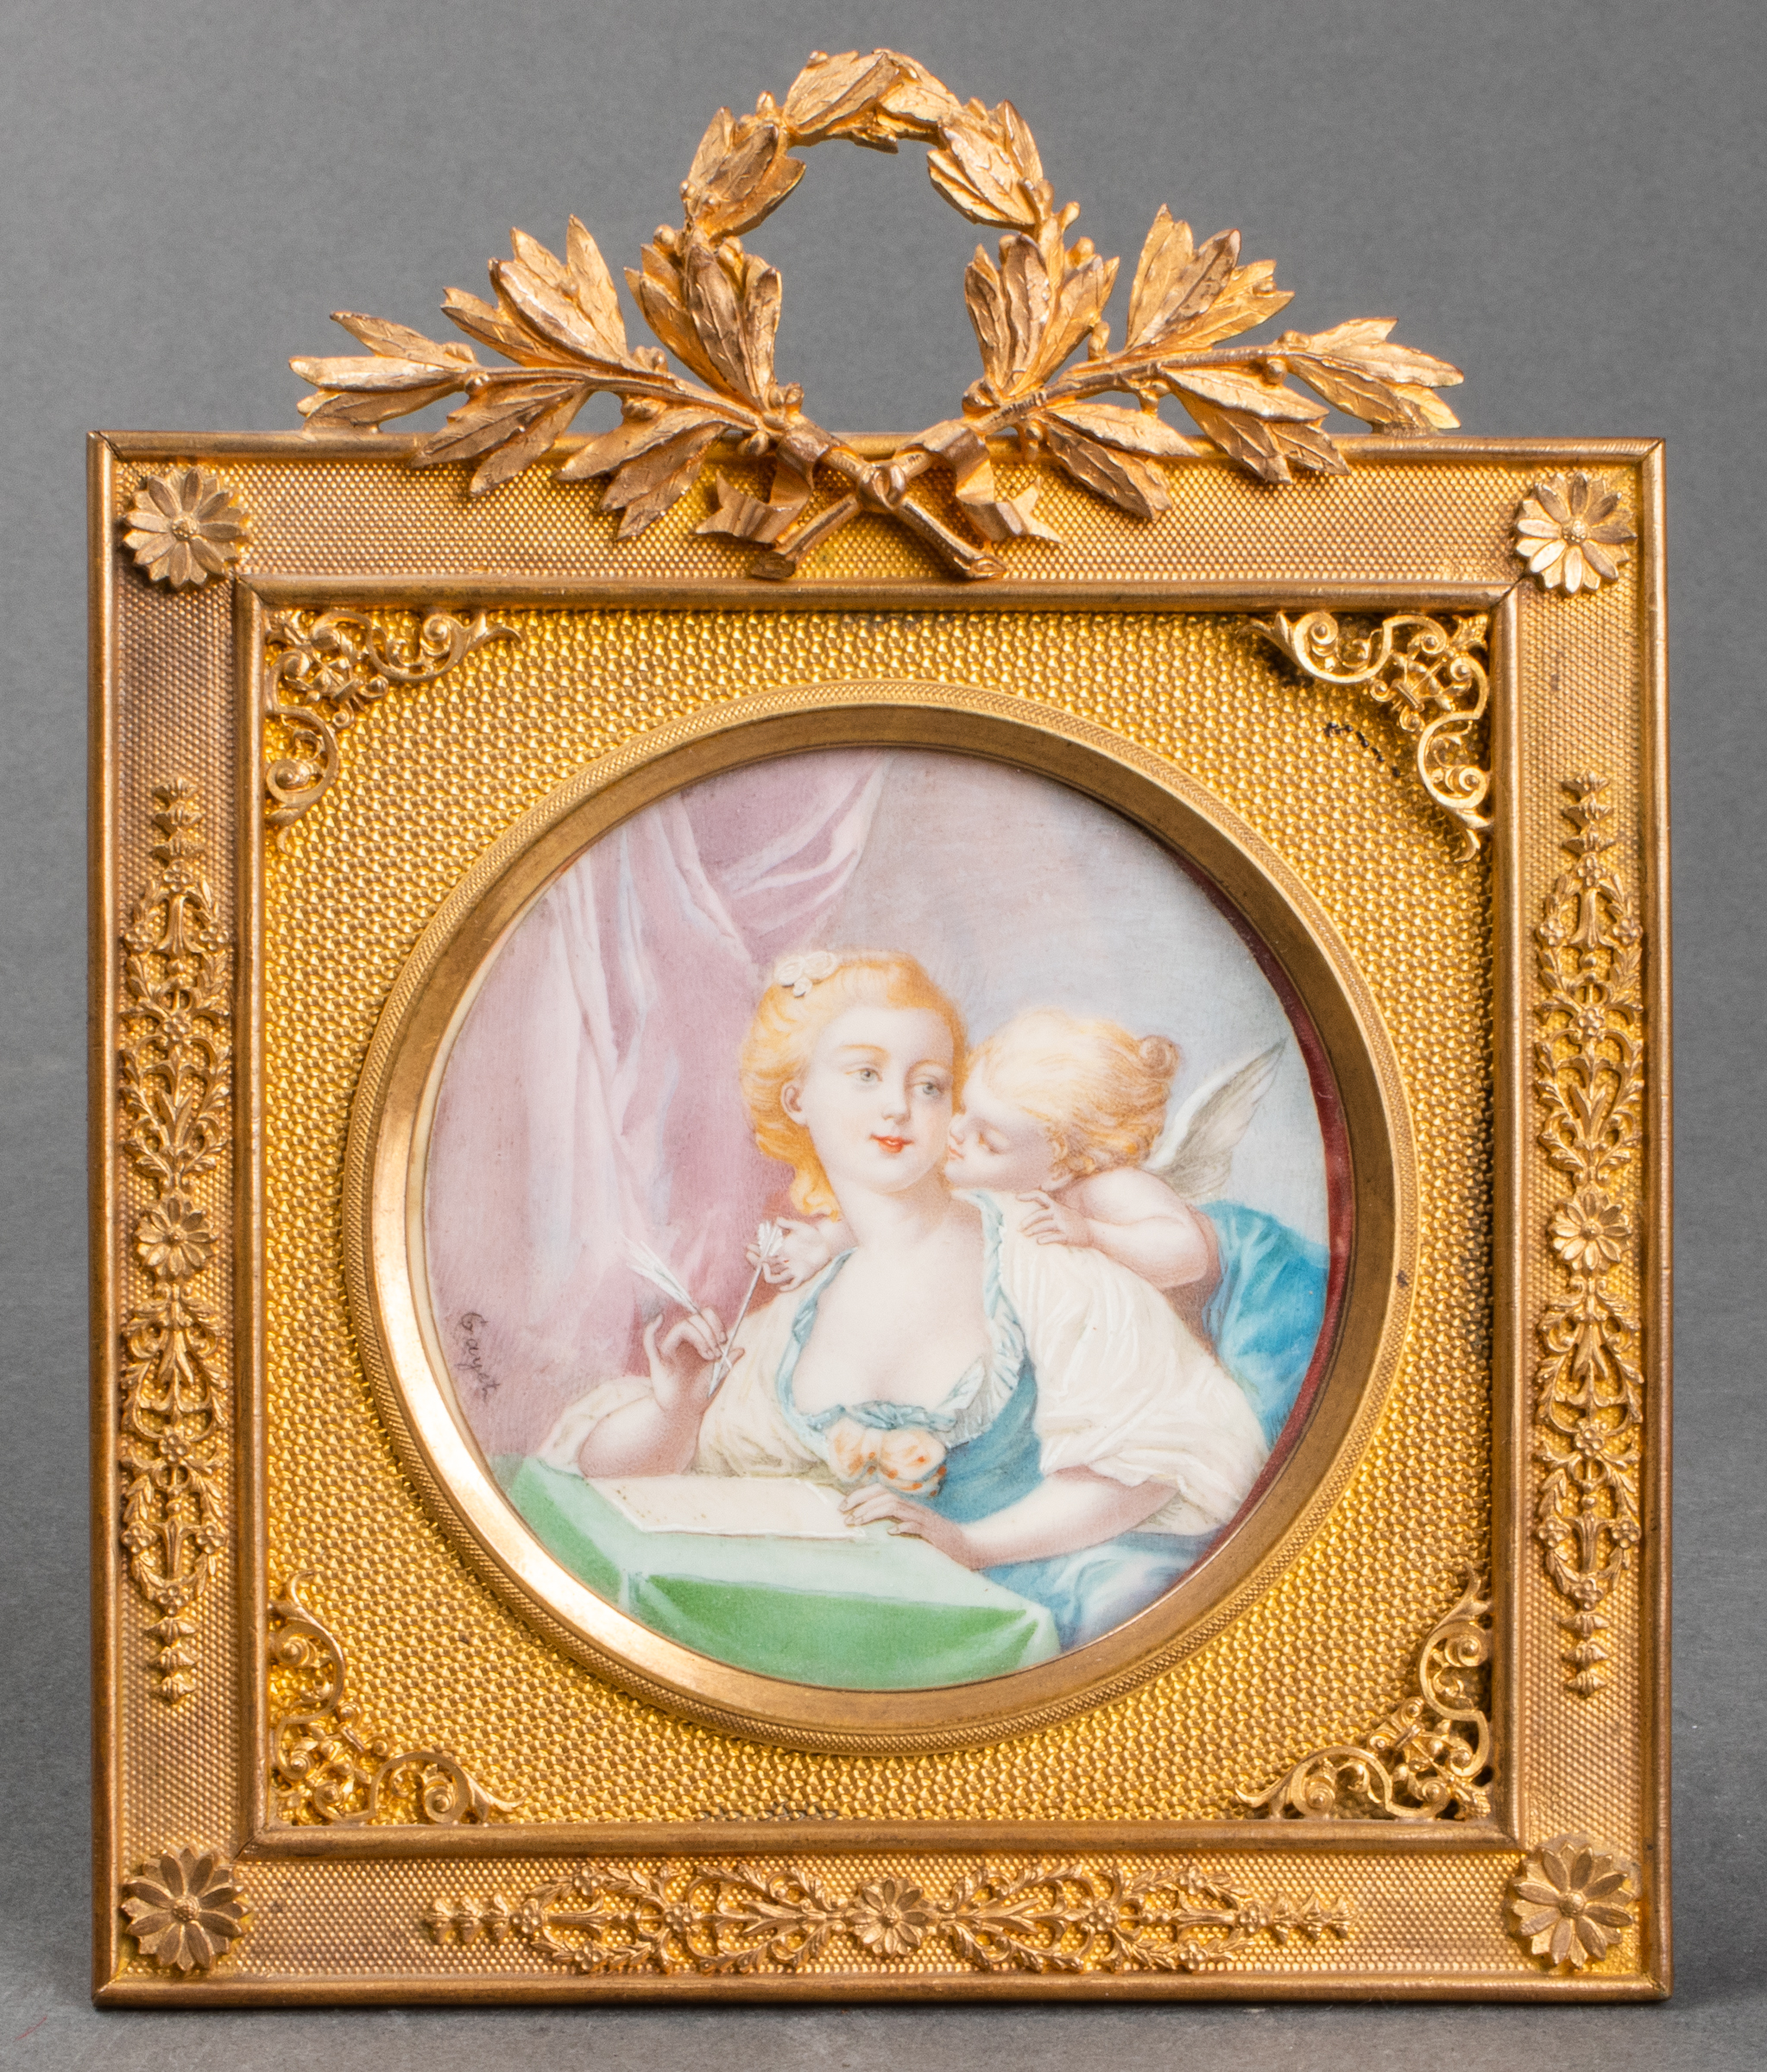 BRASS FRAME WITH 18TH C. ROCOCO